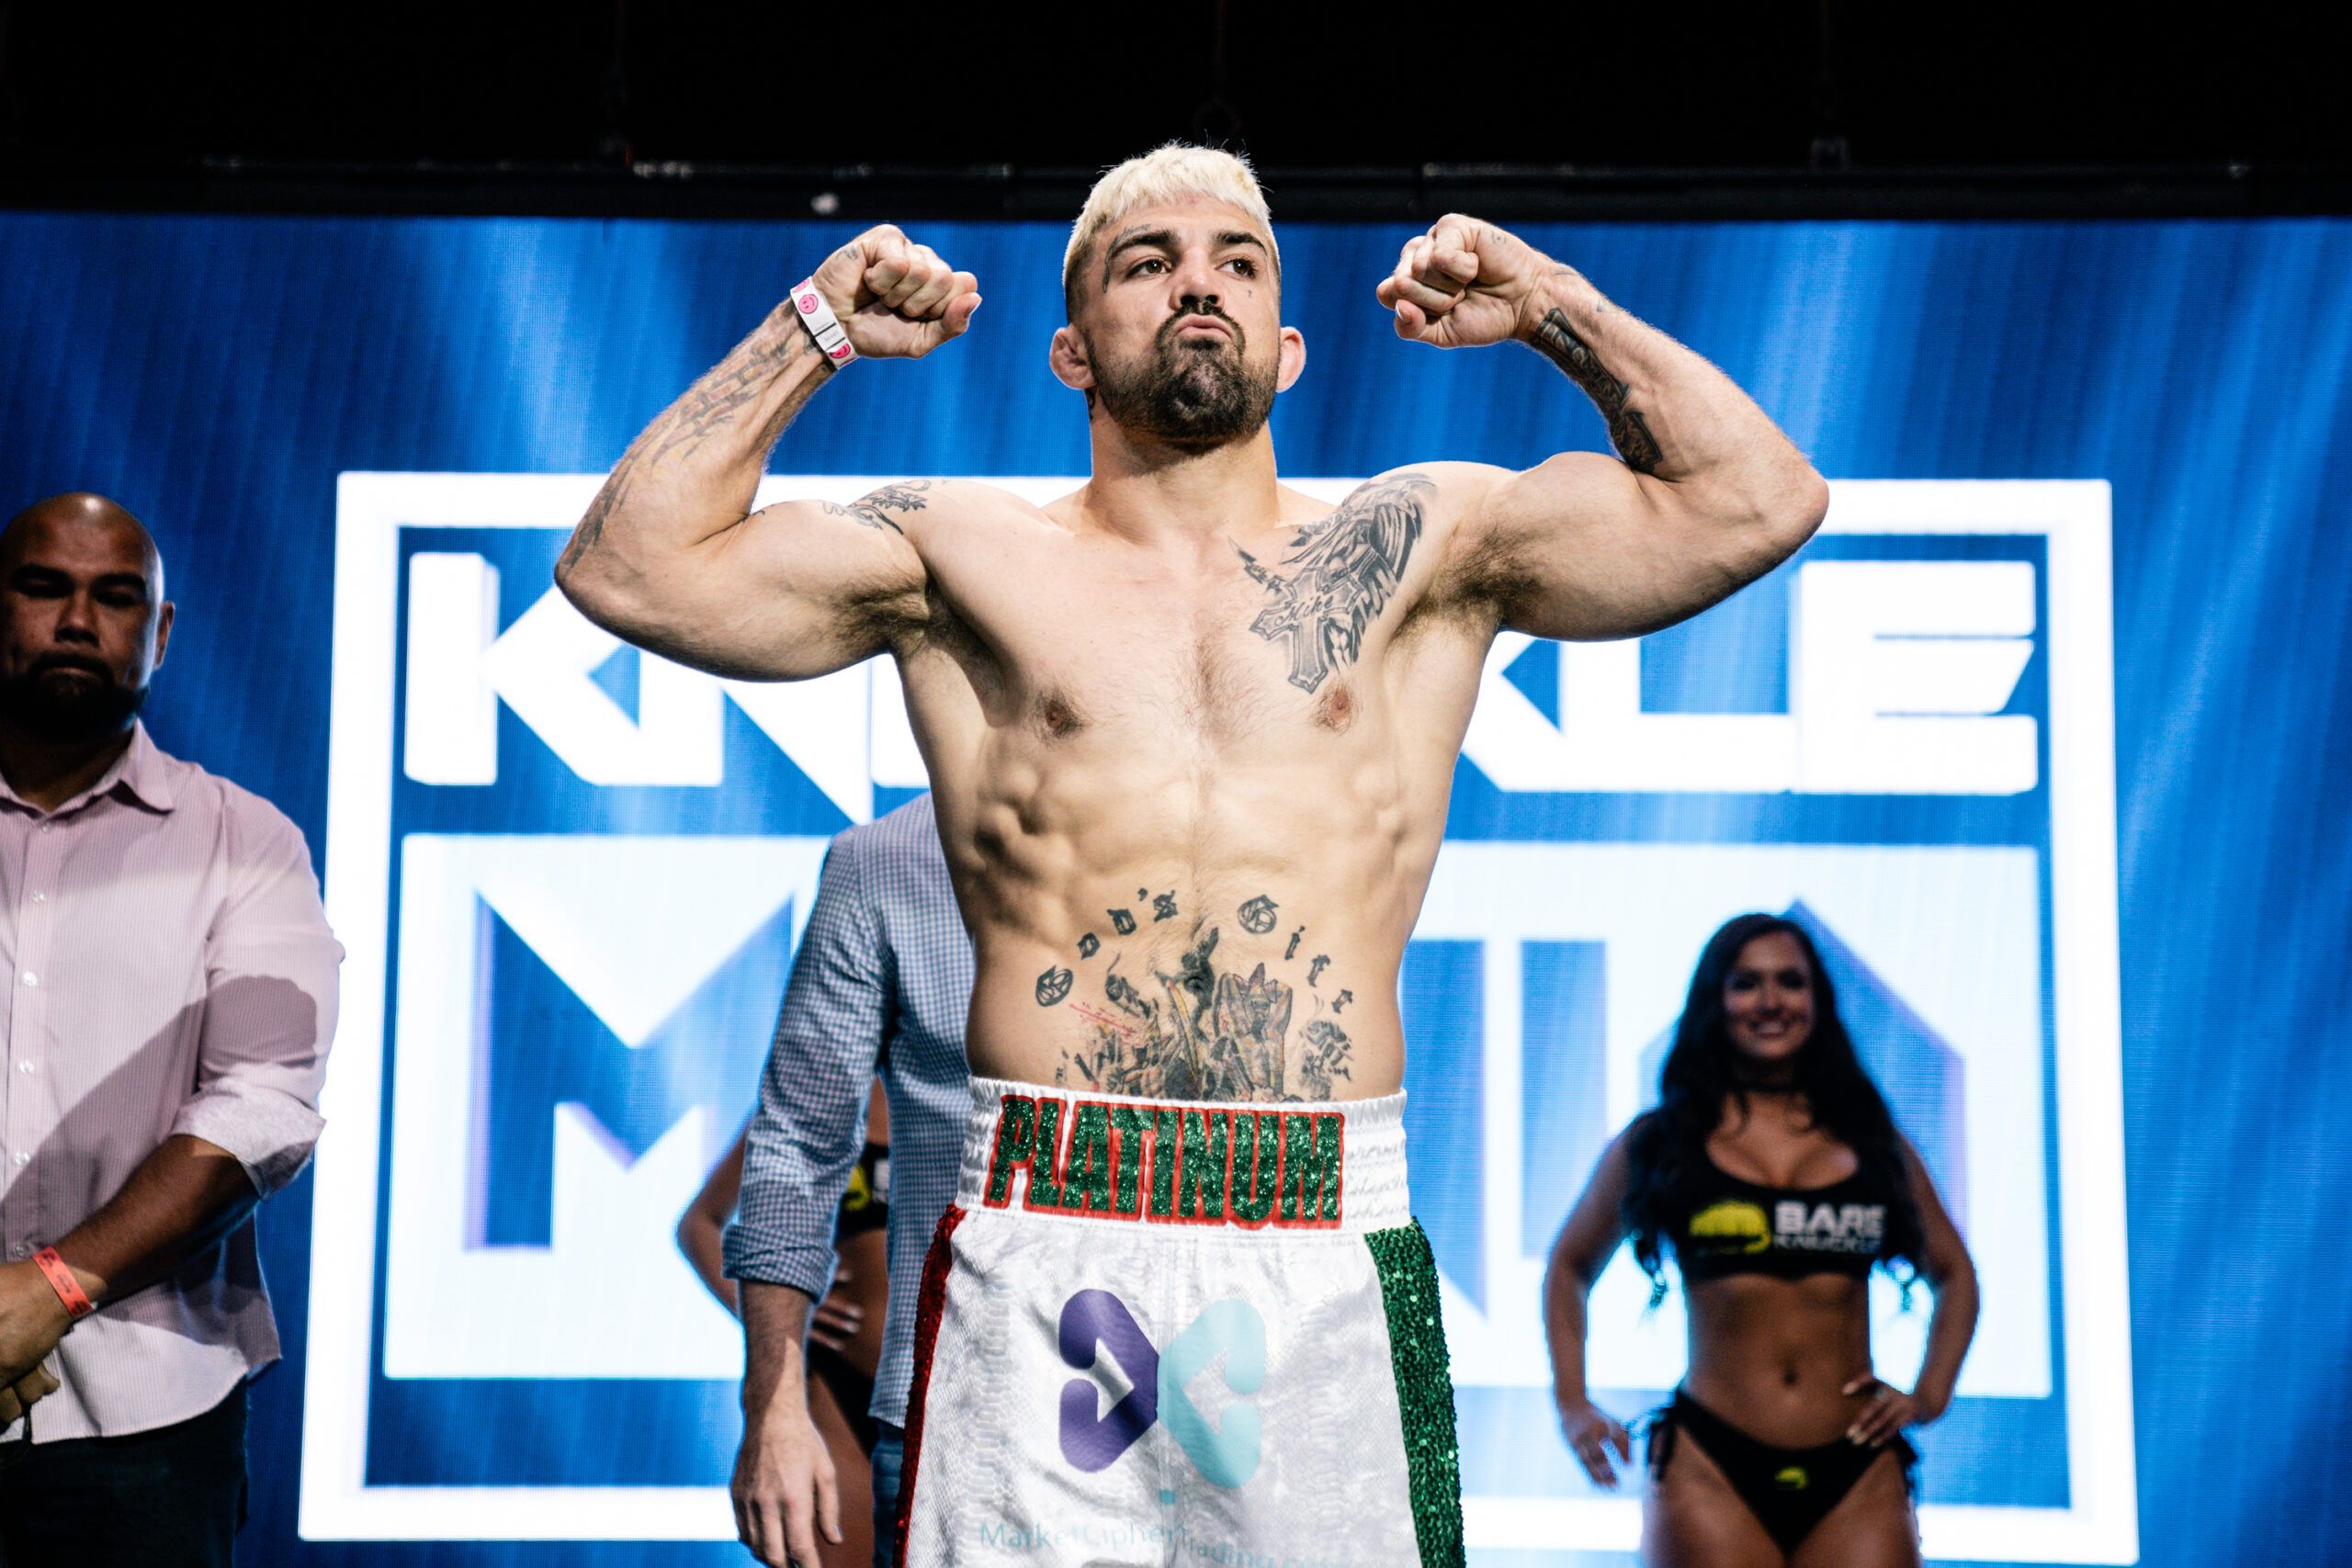 Video BKFC 41 Mike Perry vs. Luke Rockhold weighin…